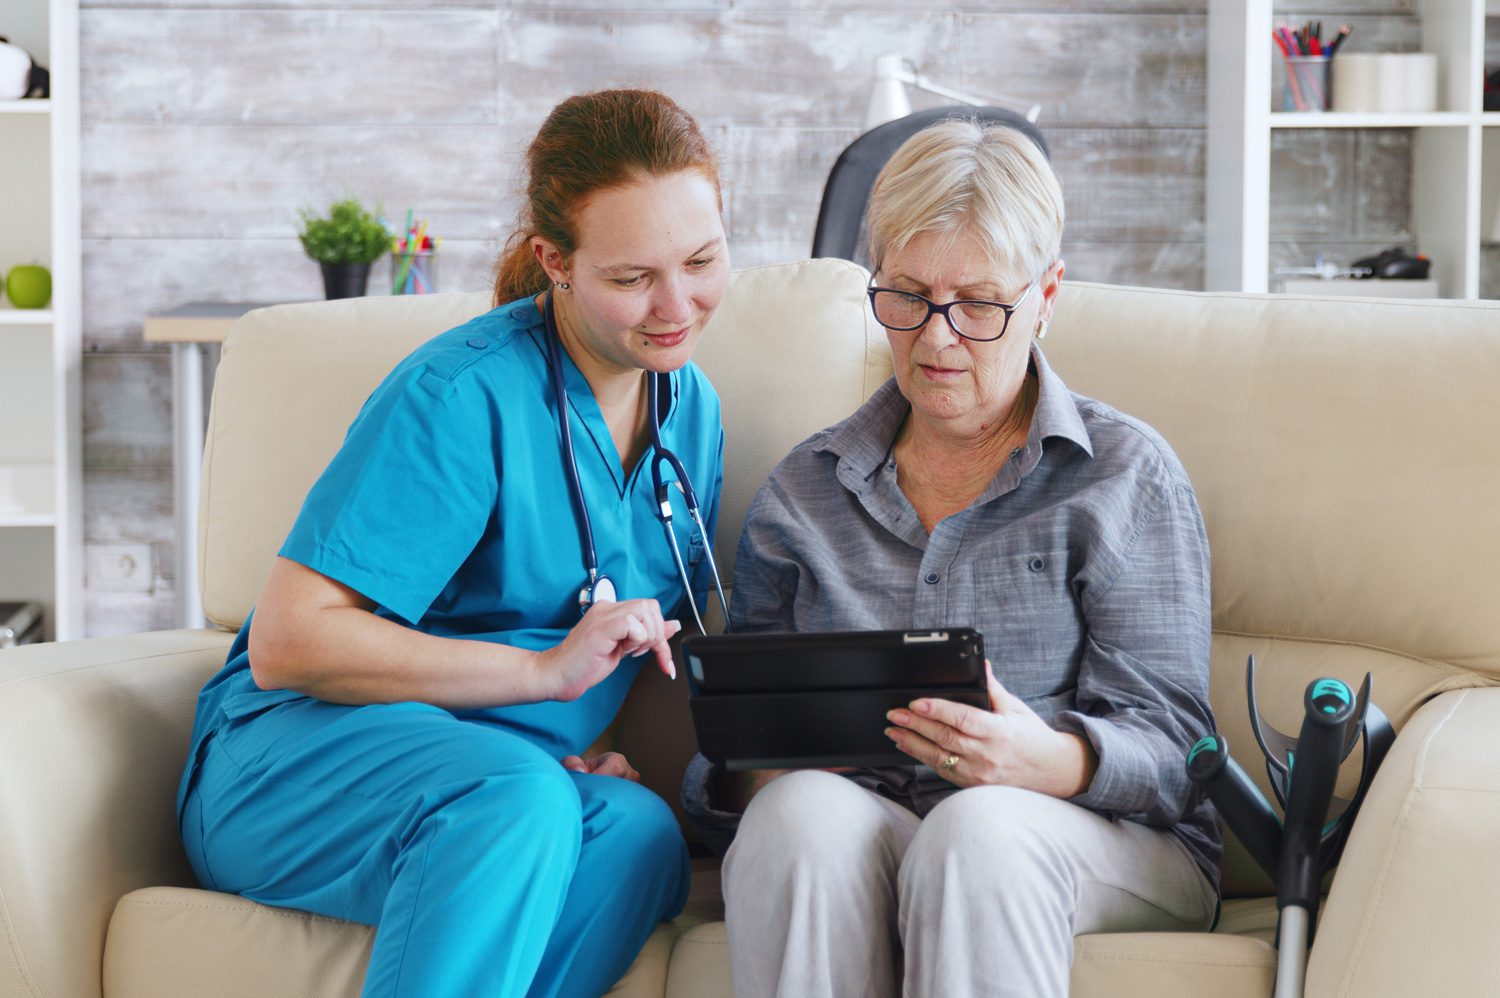 Home Health Aid & Patient on Tablet